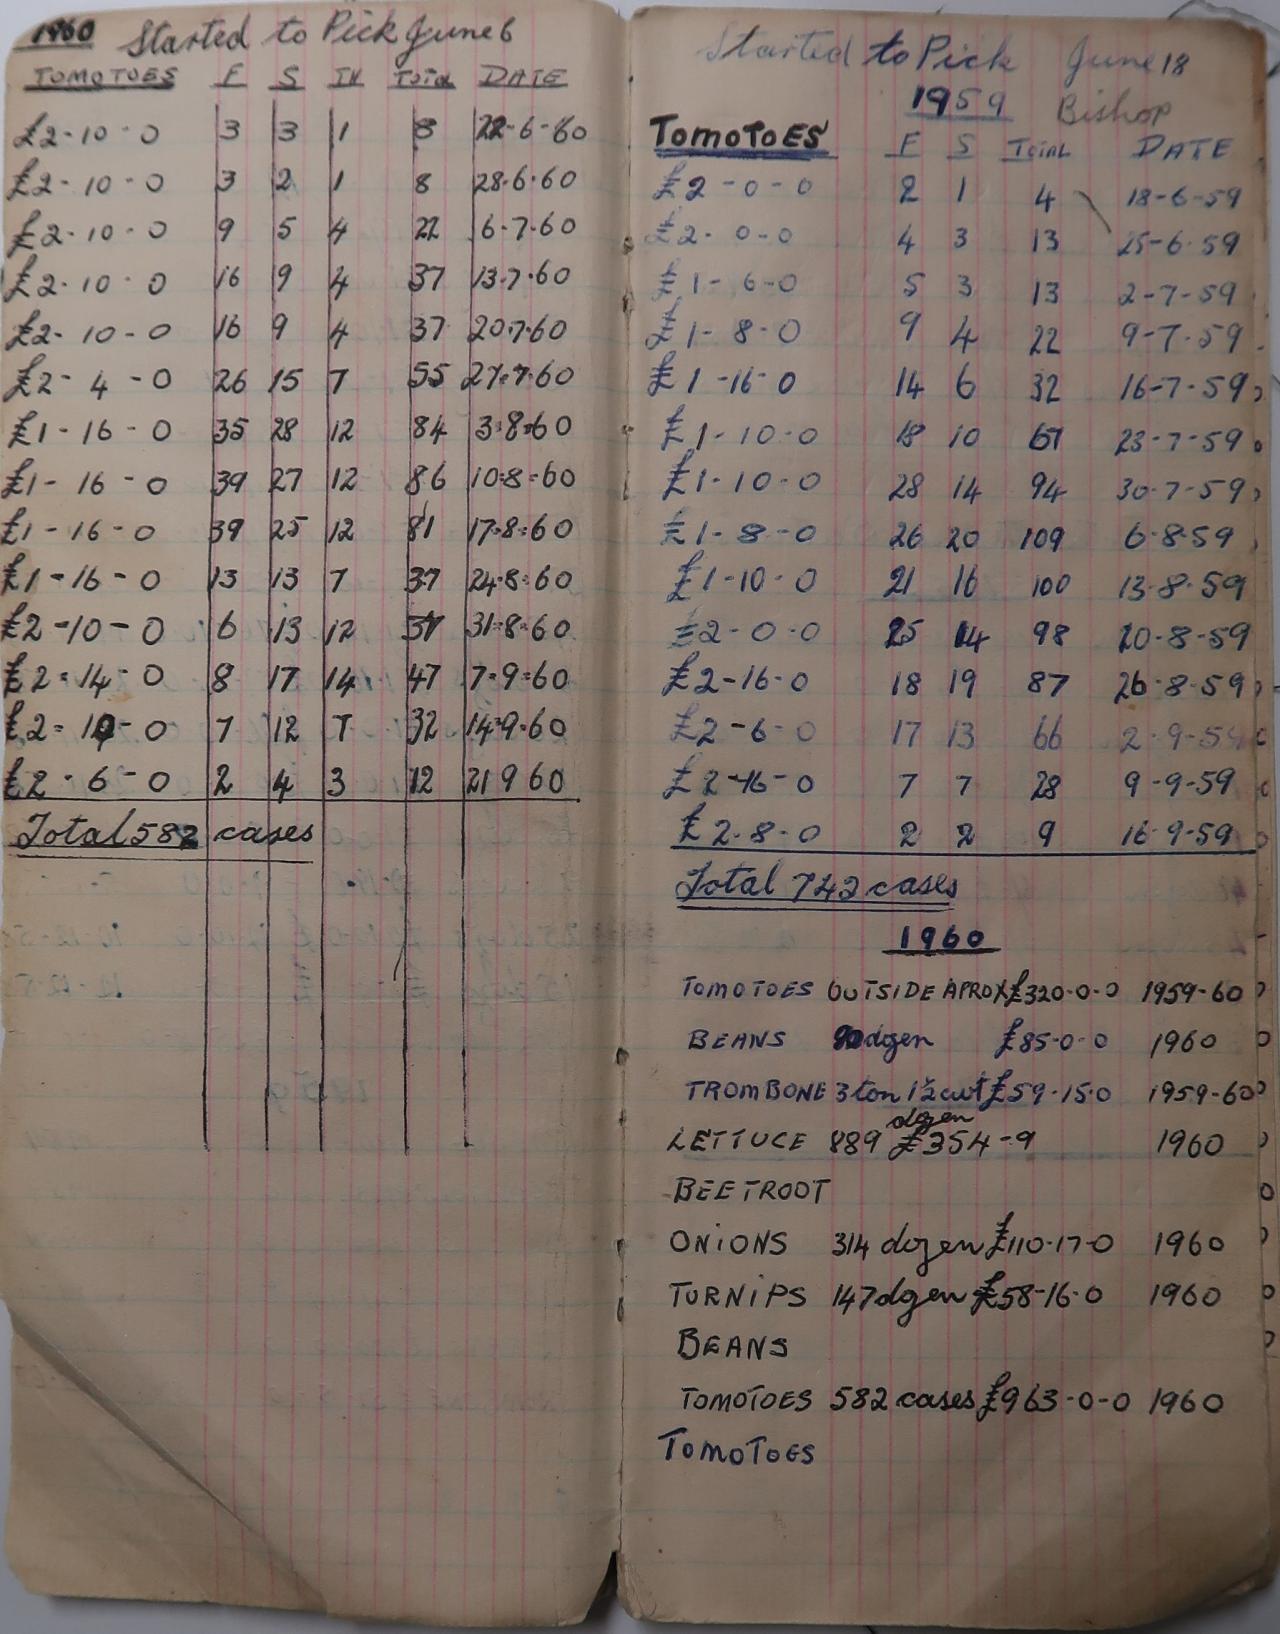 Handwritten records of tomato sales in 1959 and 1960.